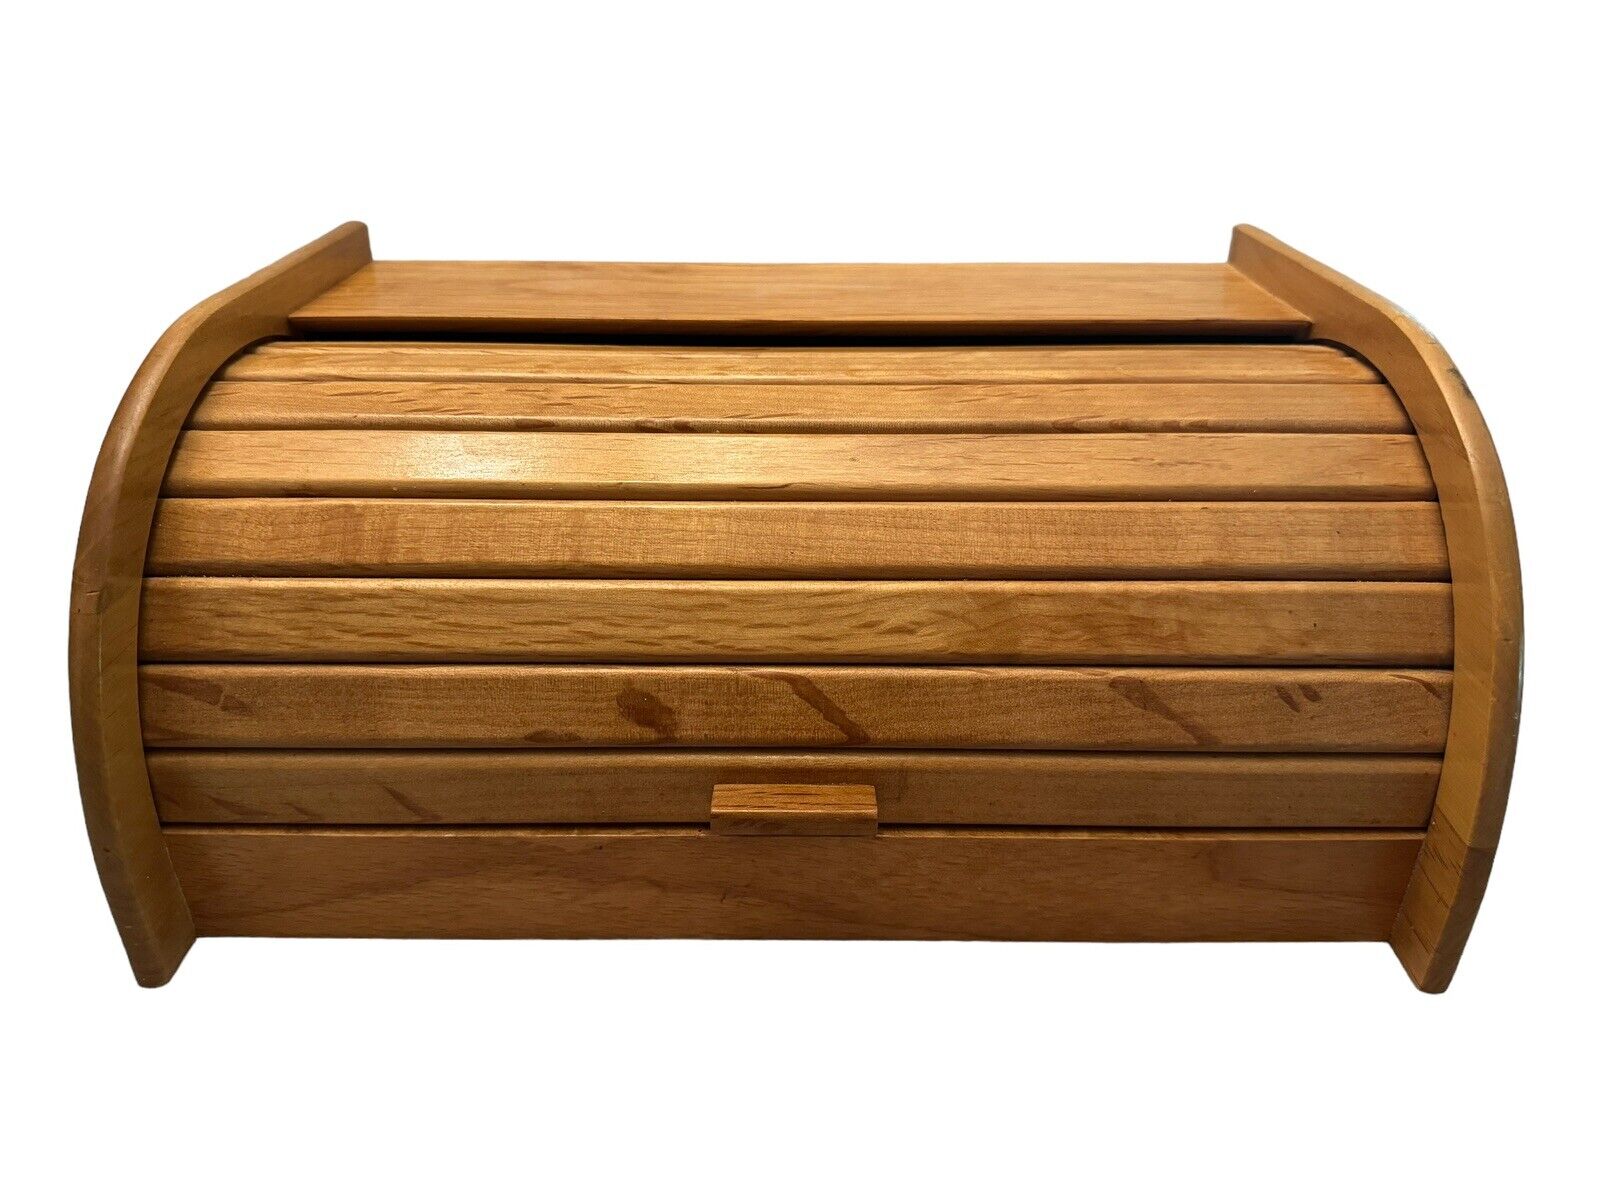 Bamboo Bread Box Wooden Storage Keeper Holder Vintage Large Capacity Roll Top